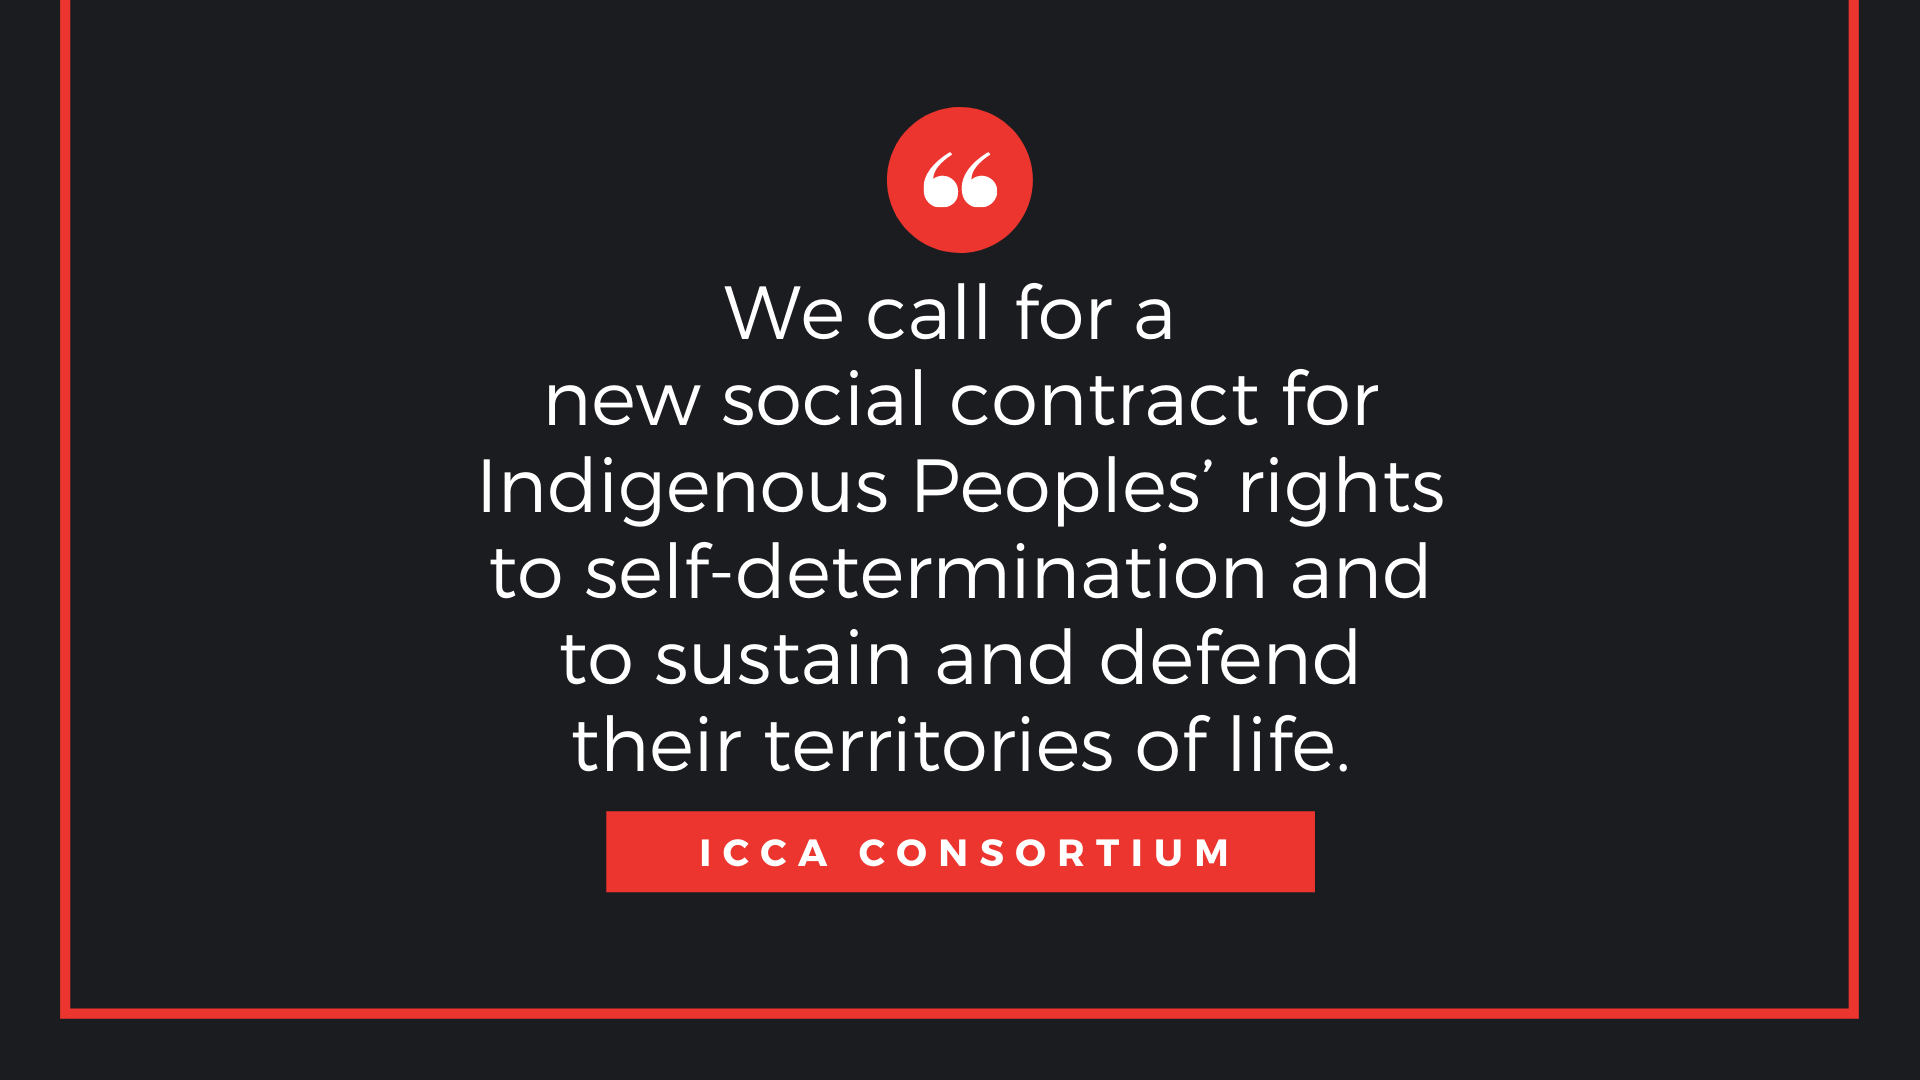 International Day of the World’s Indigenous Peoples: Statement by the ICCA Consortium